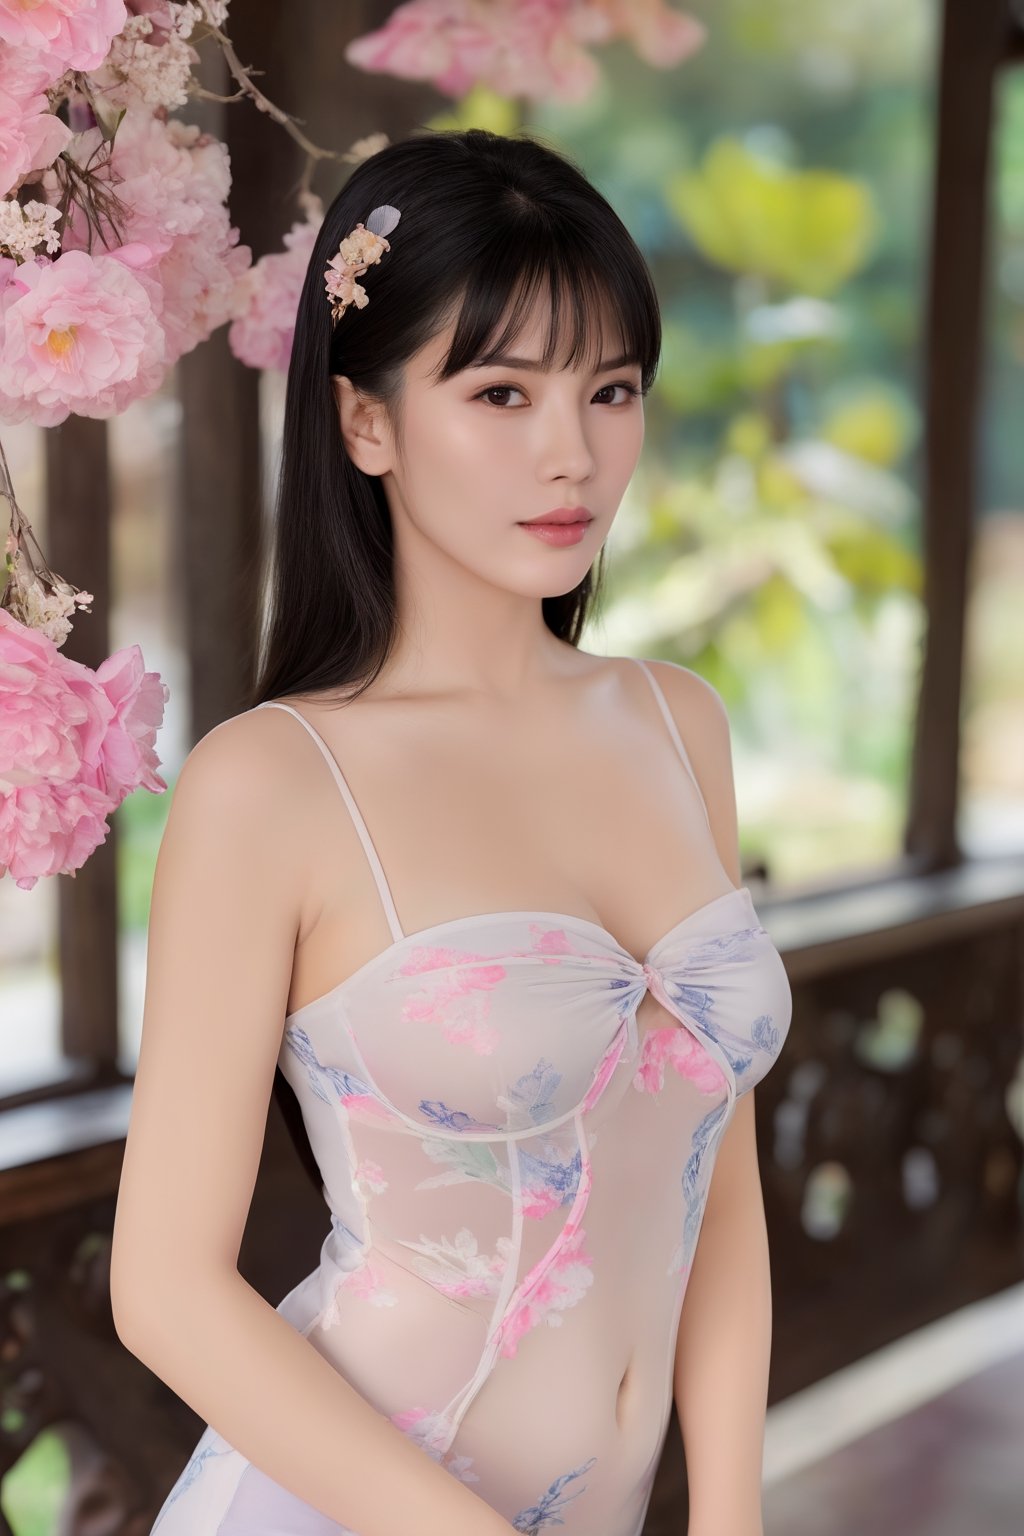 (ultra realistic,best quality),photorealistic,Extremely Realistic, in depth, cinematic light,hubggirl,

1girl, long black straight hair with bangs, looking at viewer, relaxing expression, clearly brown eyes, longfade eyebrow, soft make up, ombre lips, large breast, hourglass body, finger detailed, BREAK wearing half naked floral cheongsam, holding flower, (smeling flower), (spring season theme:1.5), windy, spring forest background detailed,

perfect lighting, vibrant colors, intricate details,
high detailed skin, pale skin,
intricate background, realism,realistic,raw,analog,portrait,photorealistic,
taken by Canon EOS,SIGMA Art Lens 35mm F1.4,ISO 200 Shutter Speed 2000,Vivid picture,hubg_mecha_girl,hubgwomen